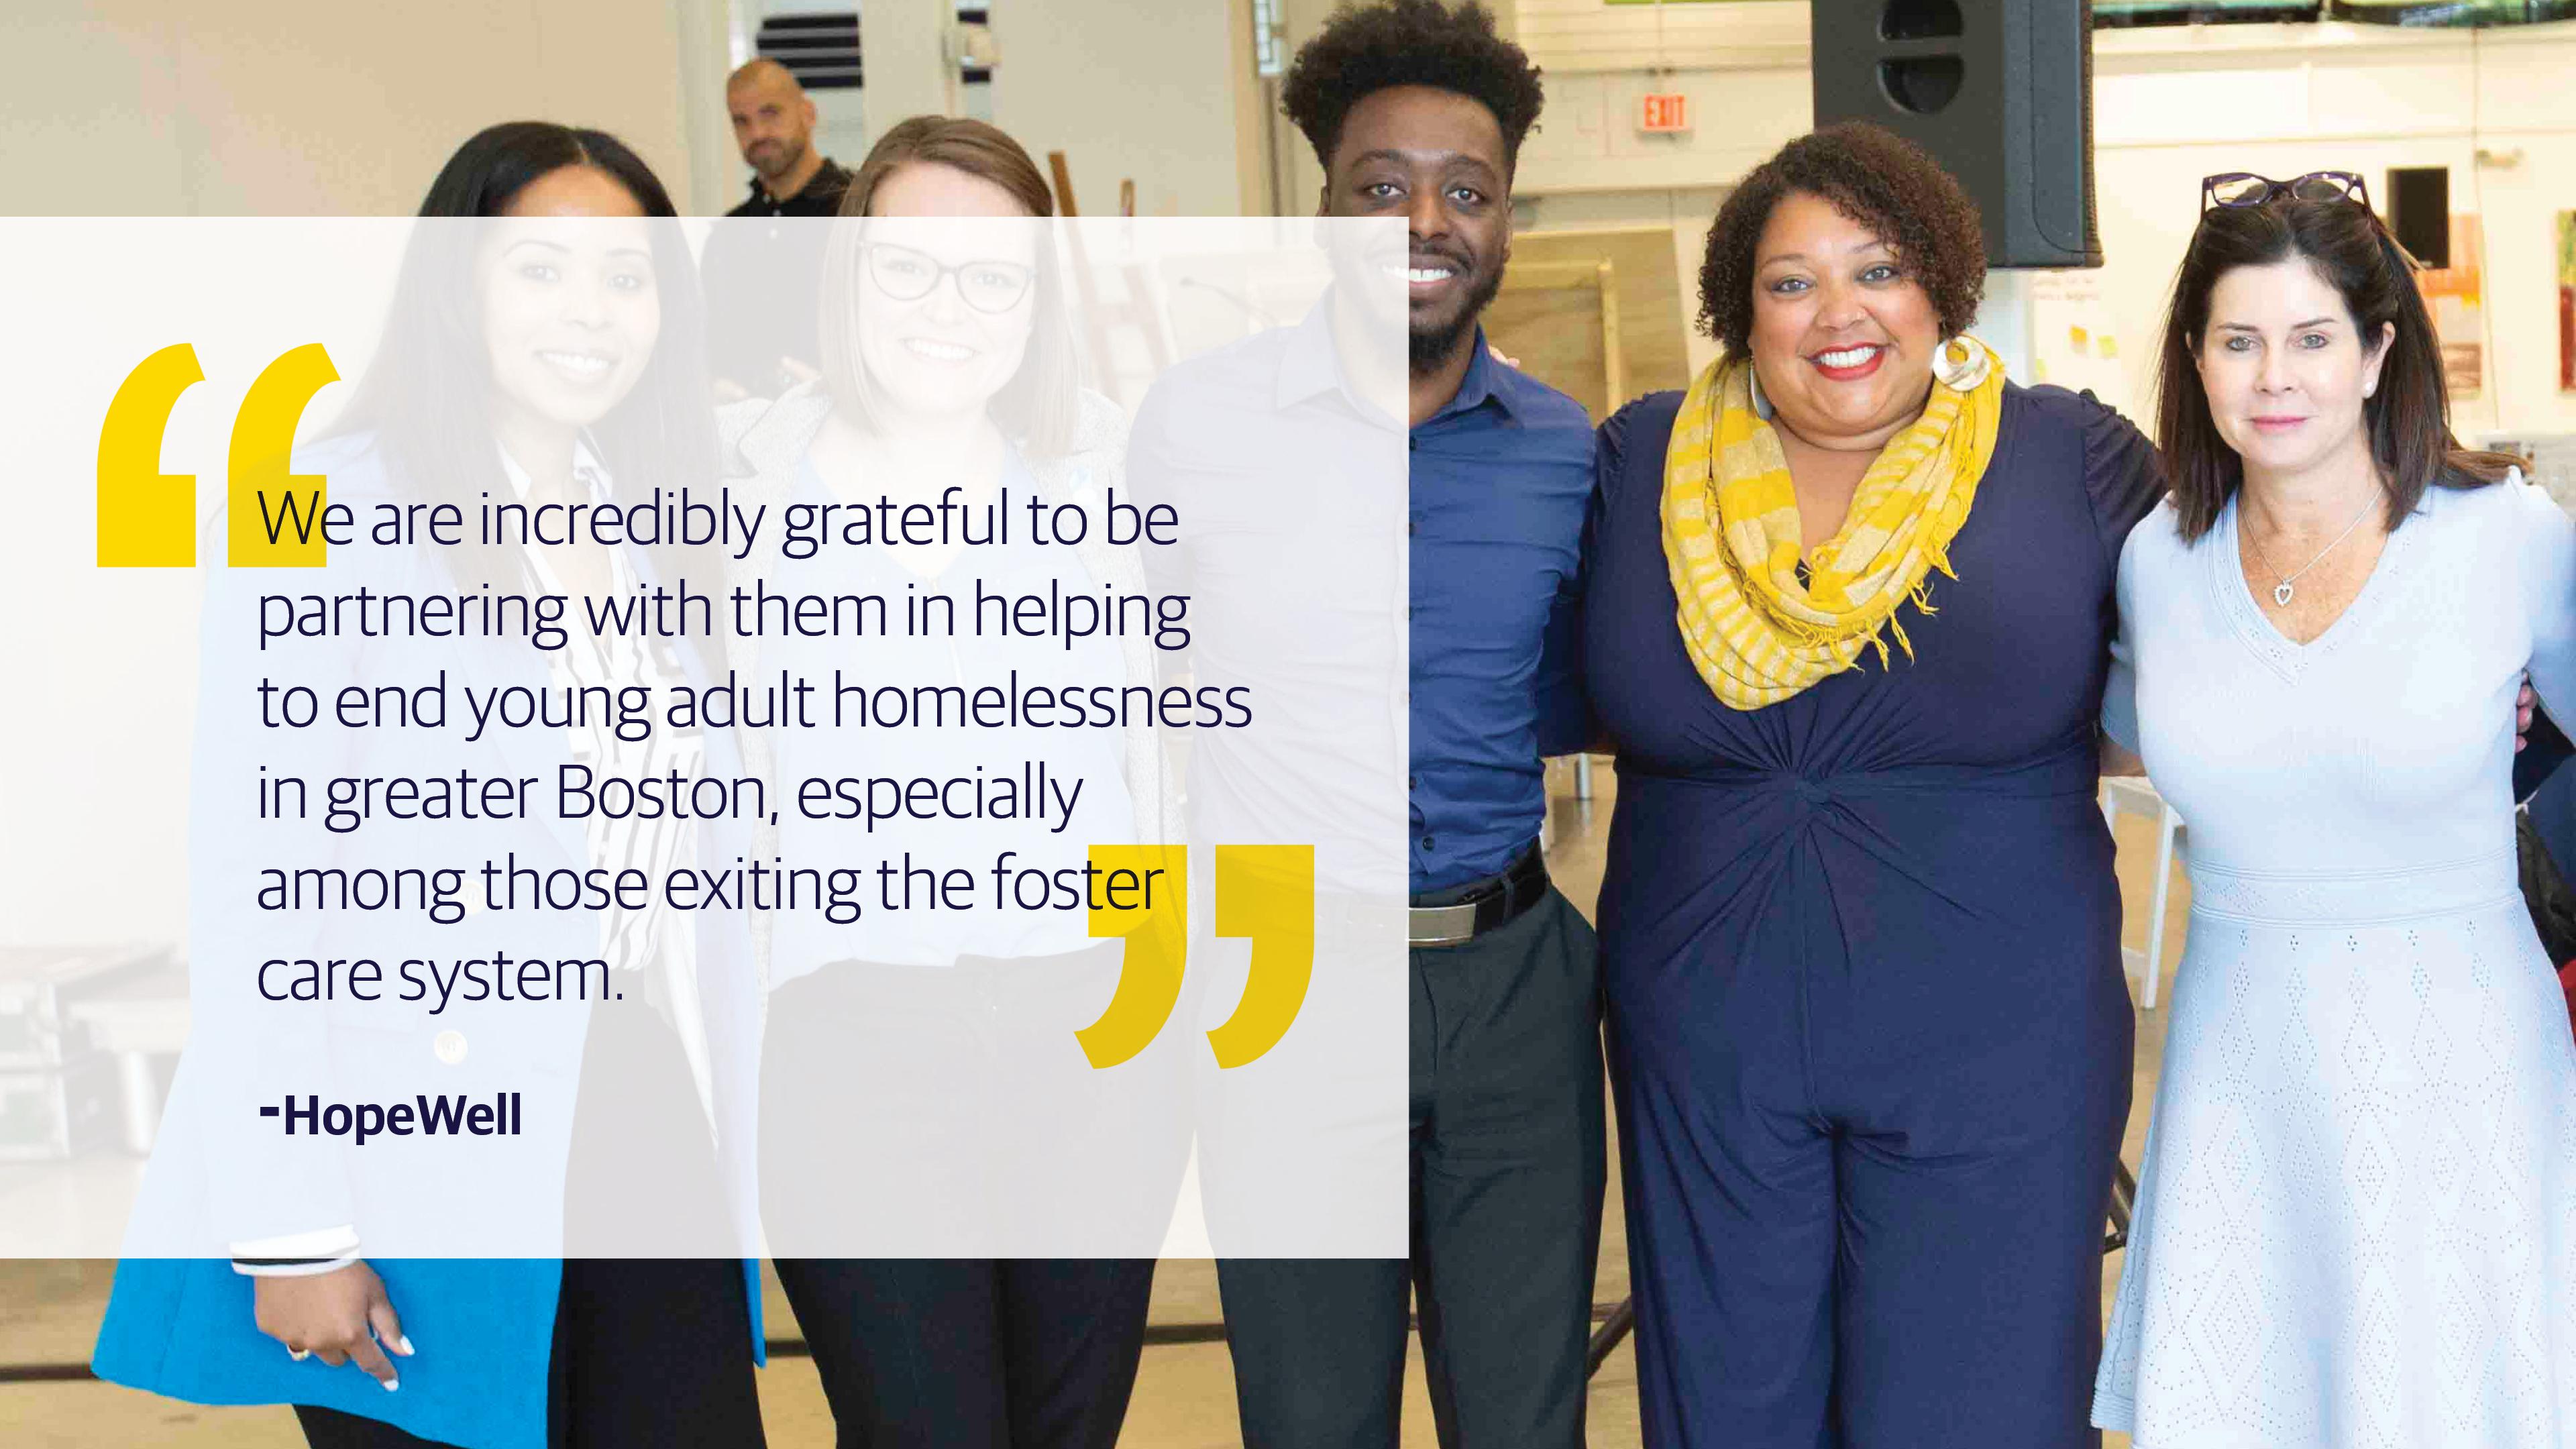 (slide 2 of 3) "We are incredibly grateful to be partnering with them in helping to end young adult homelessness in greater Boston, especially among those exiting the foster care system." - Hopewell. 